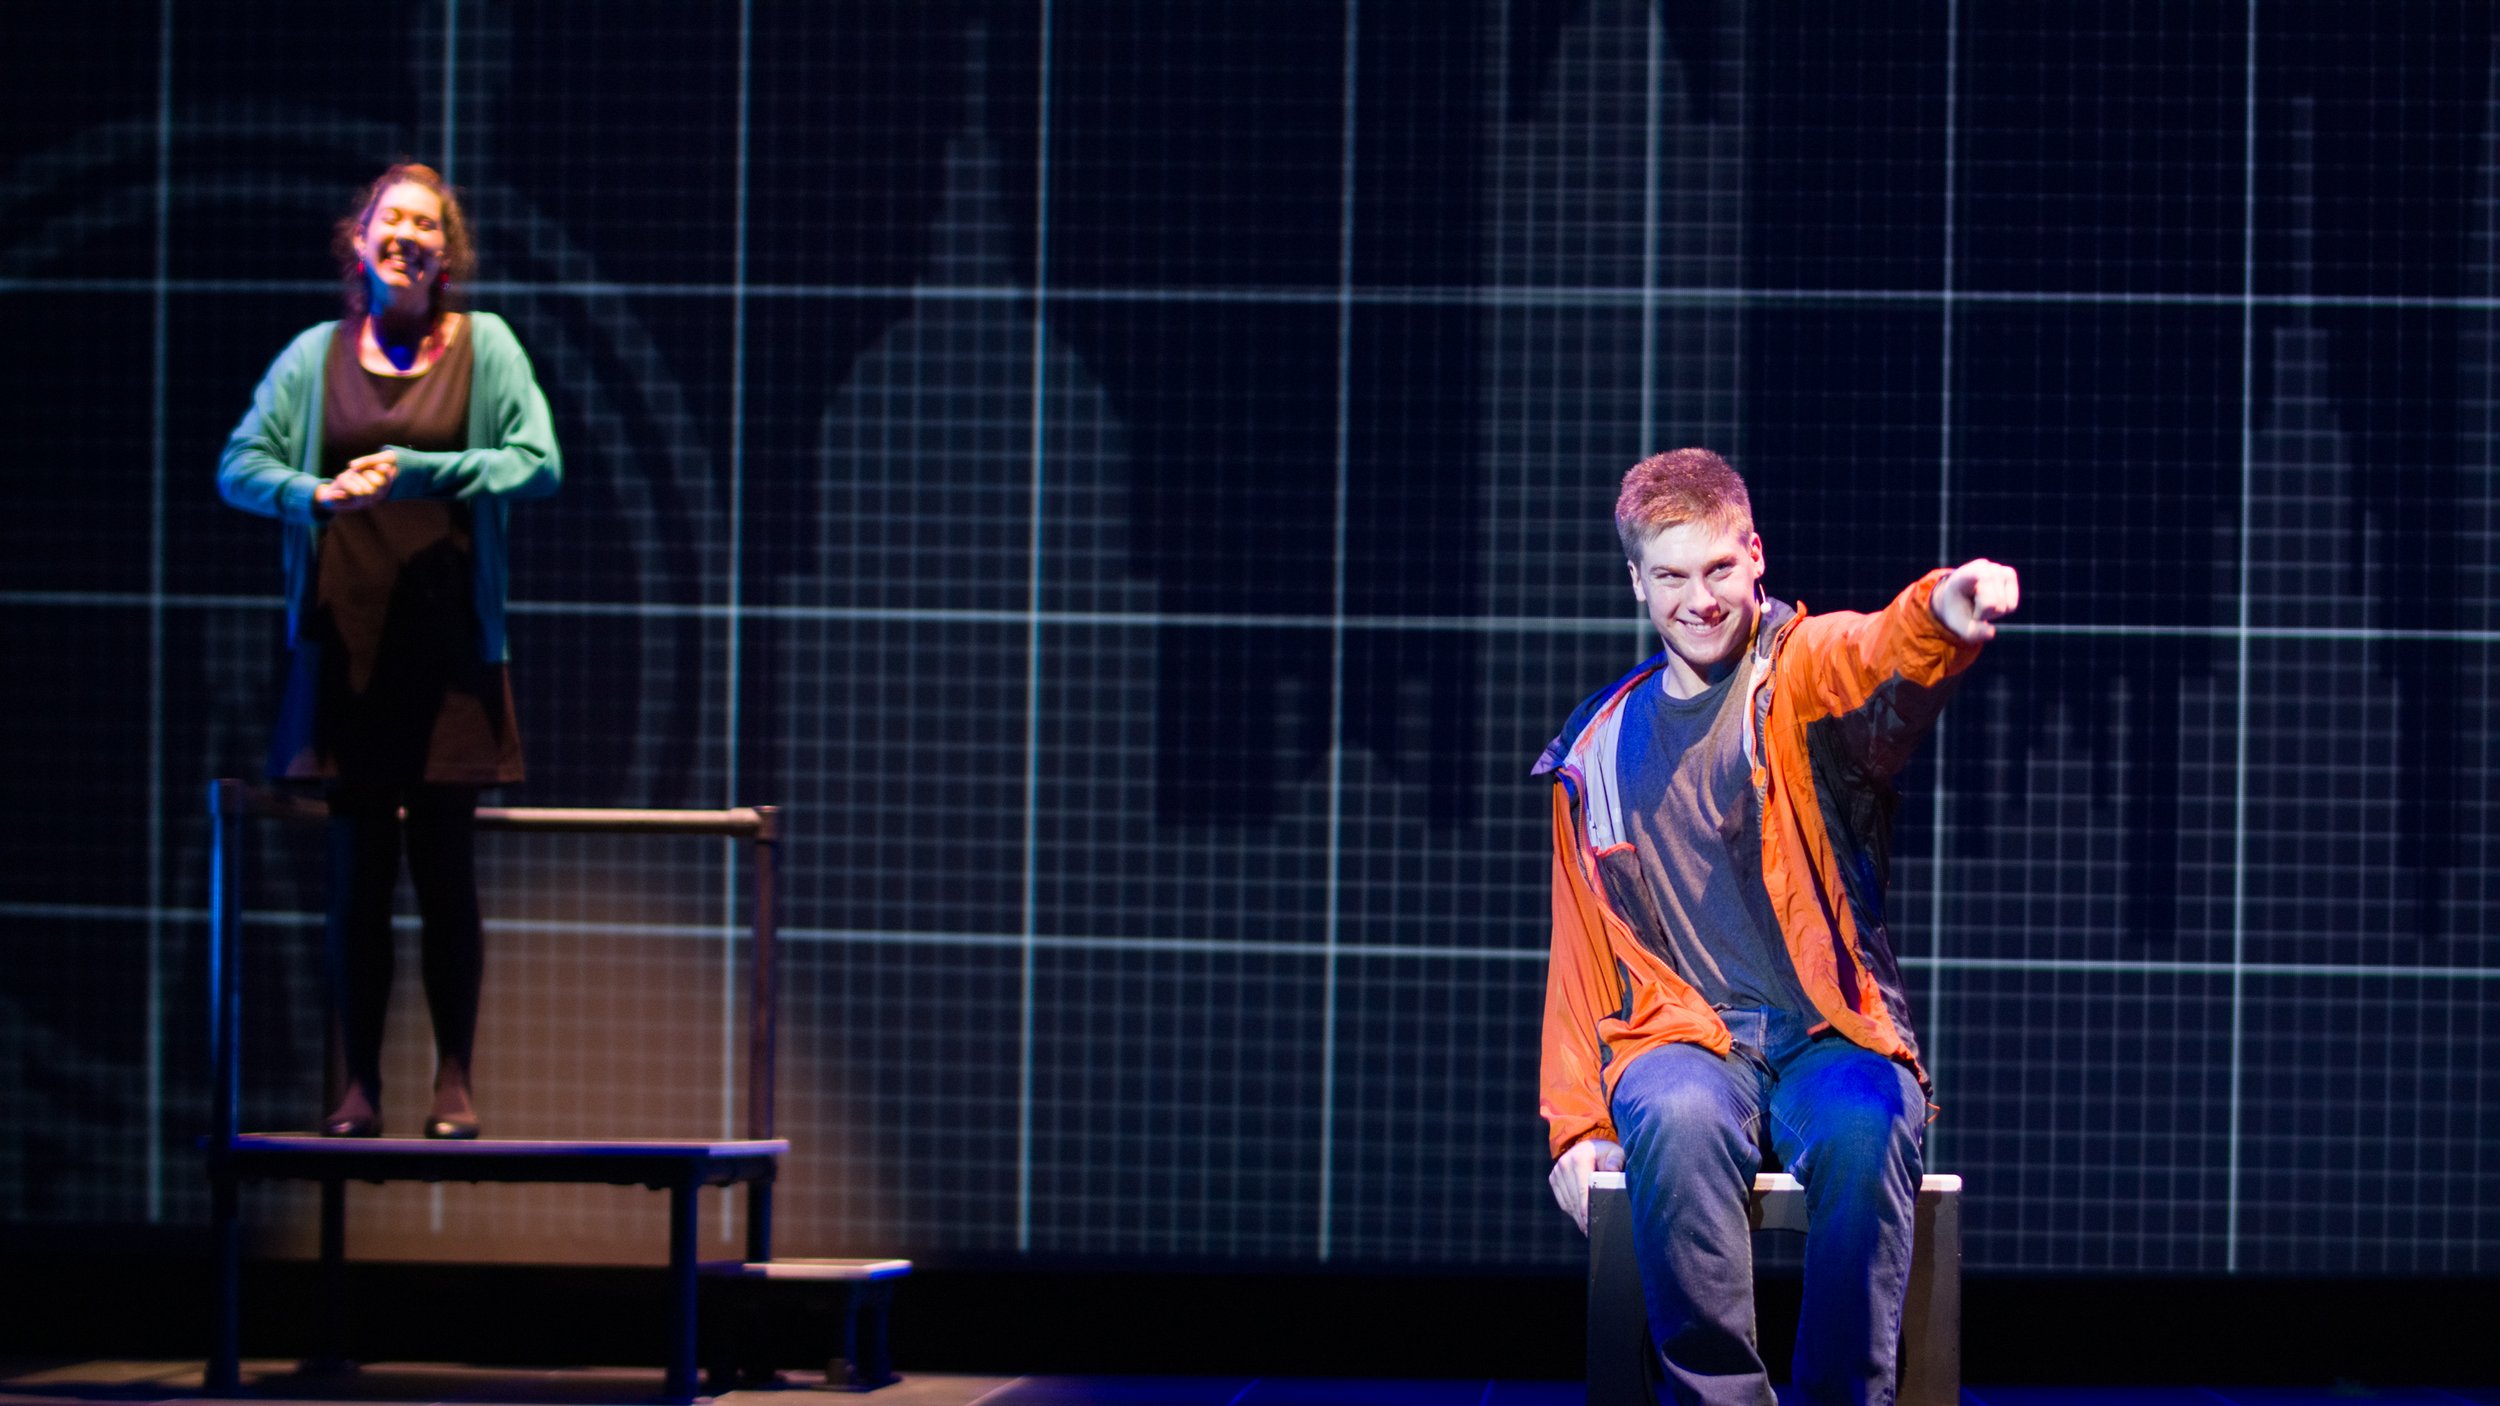  Kiana Spath (left) and Justin Valine (right) during last dress rehearsal before the first showing of "The Curious Incident of The Dog in The Night-Time" on Thursday, October 7th at Santa Monica College, Santa Monica, Calif. 